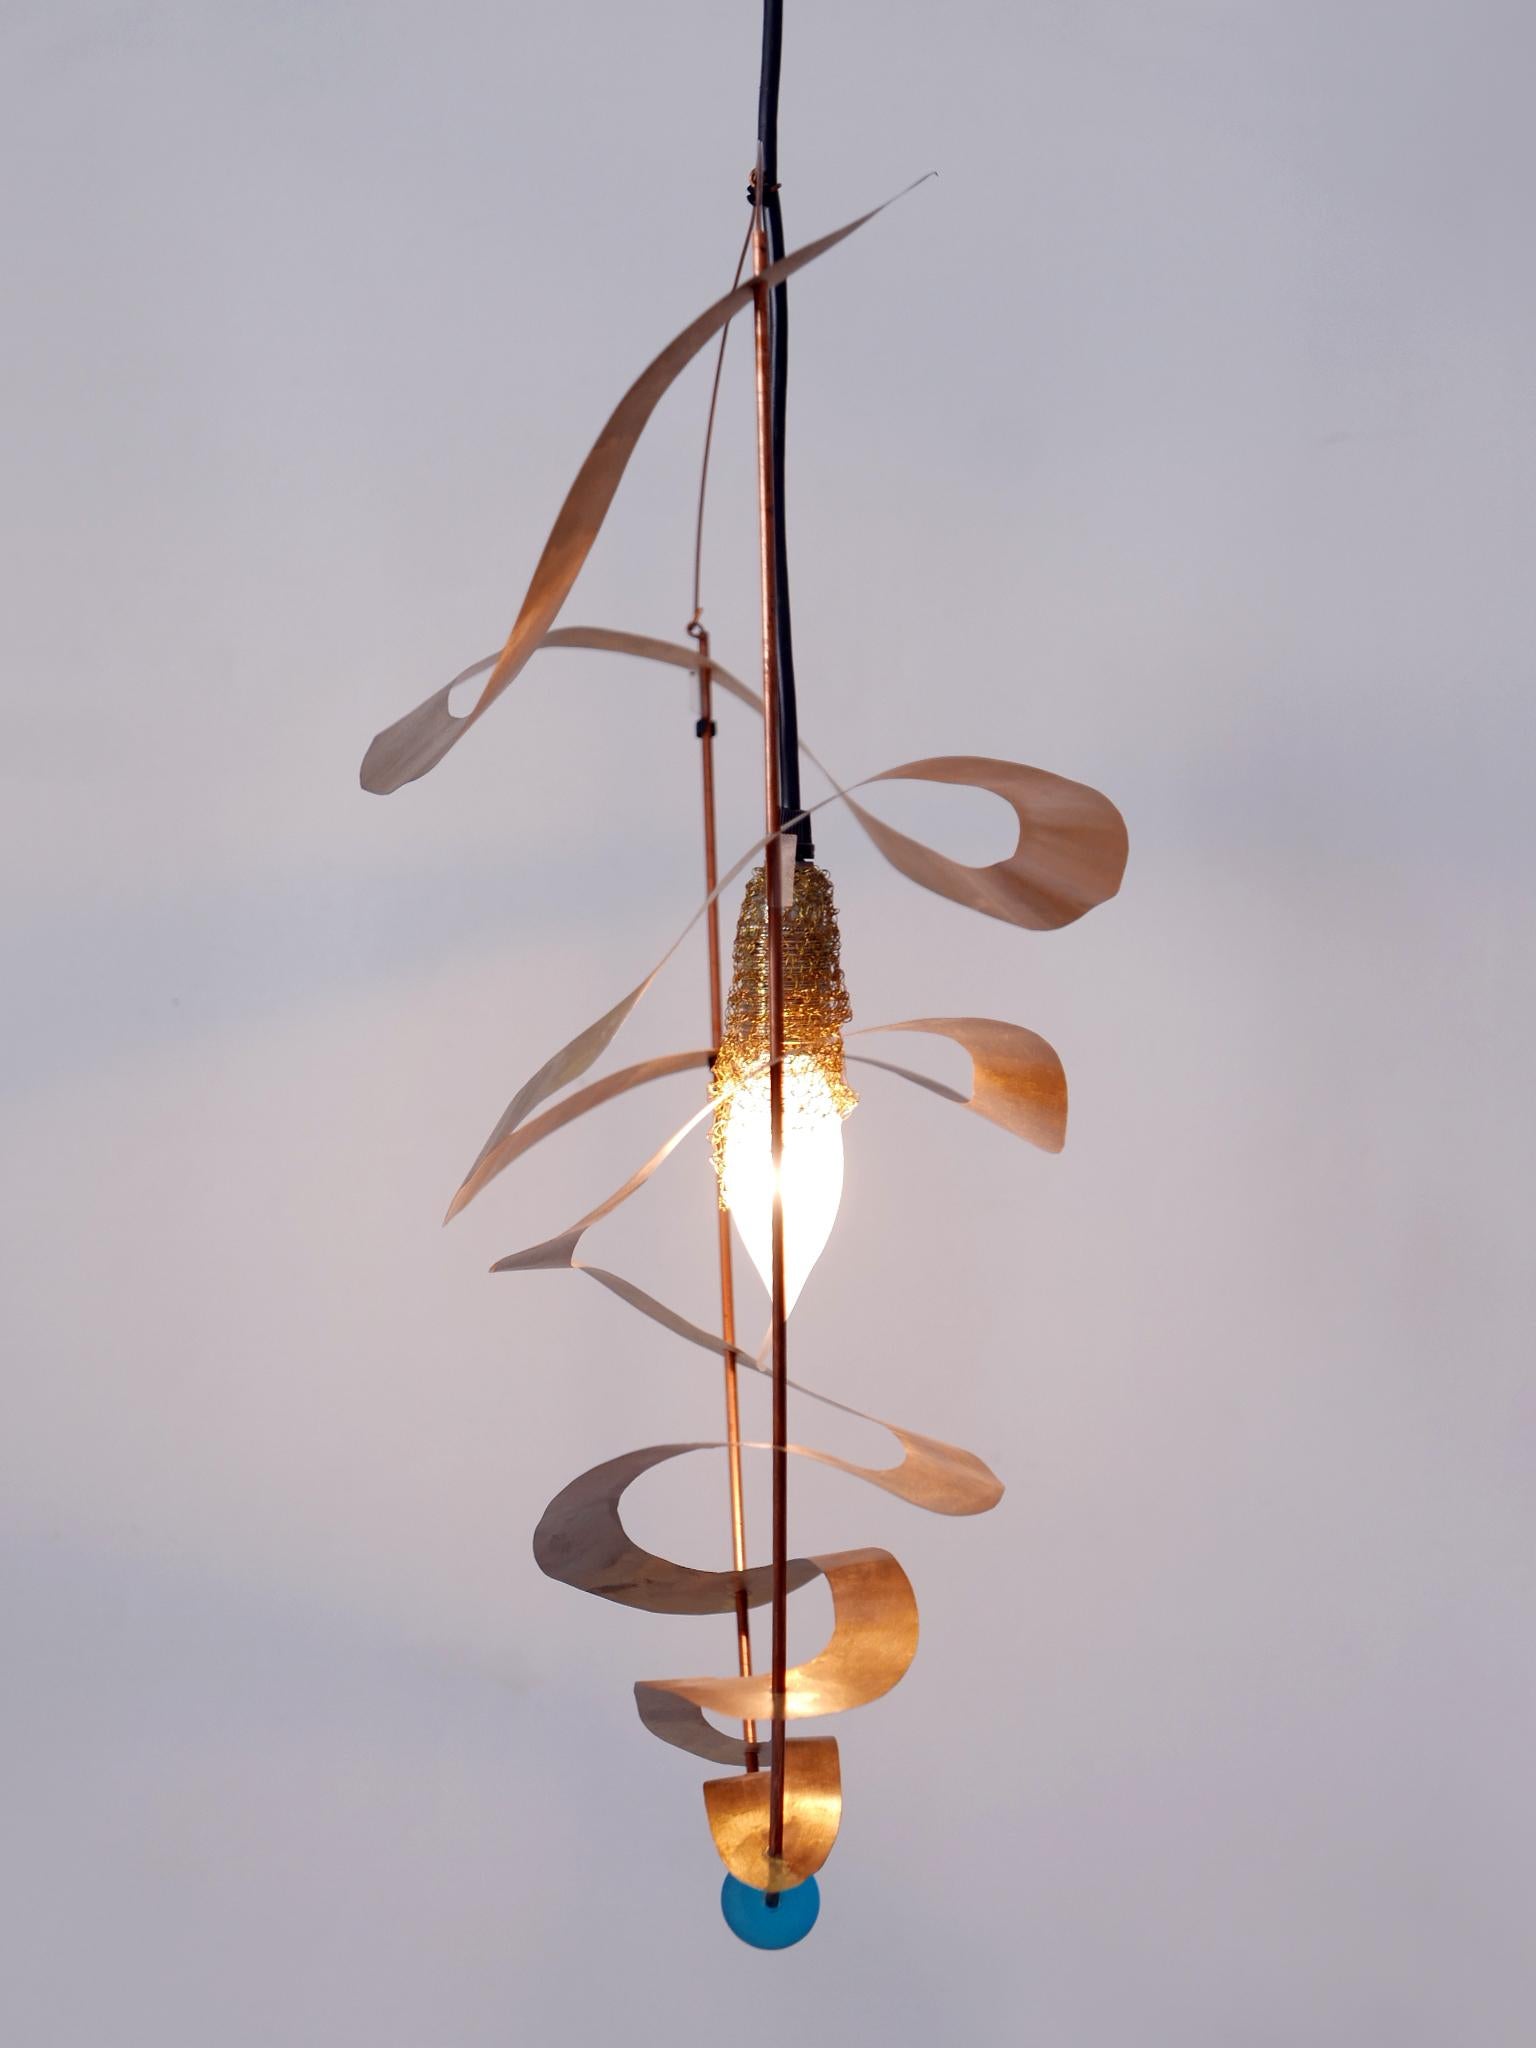 Amazing & Highly Decorative Postmodern Pendant Lamp or Hanging Light Italy 1980s For Sale 12